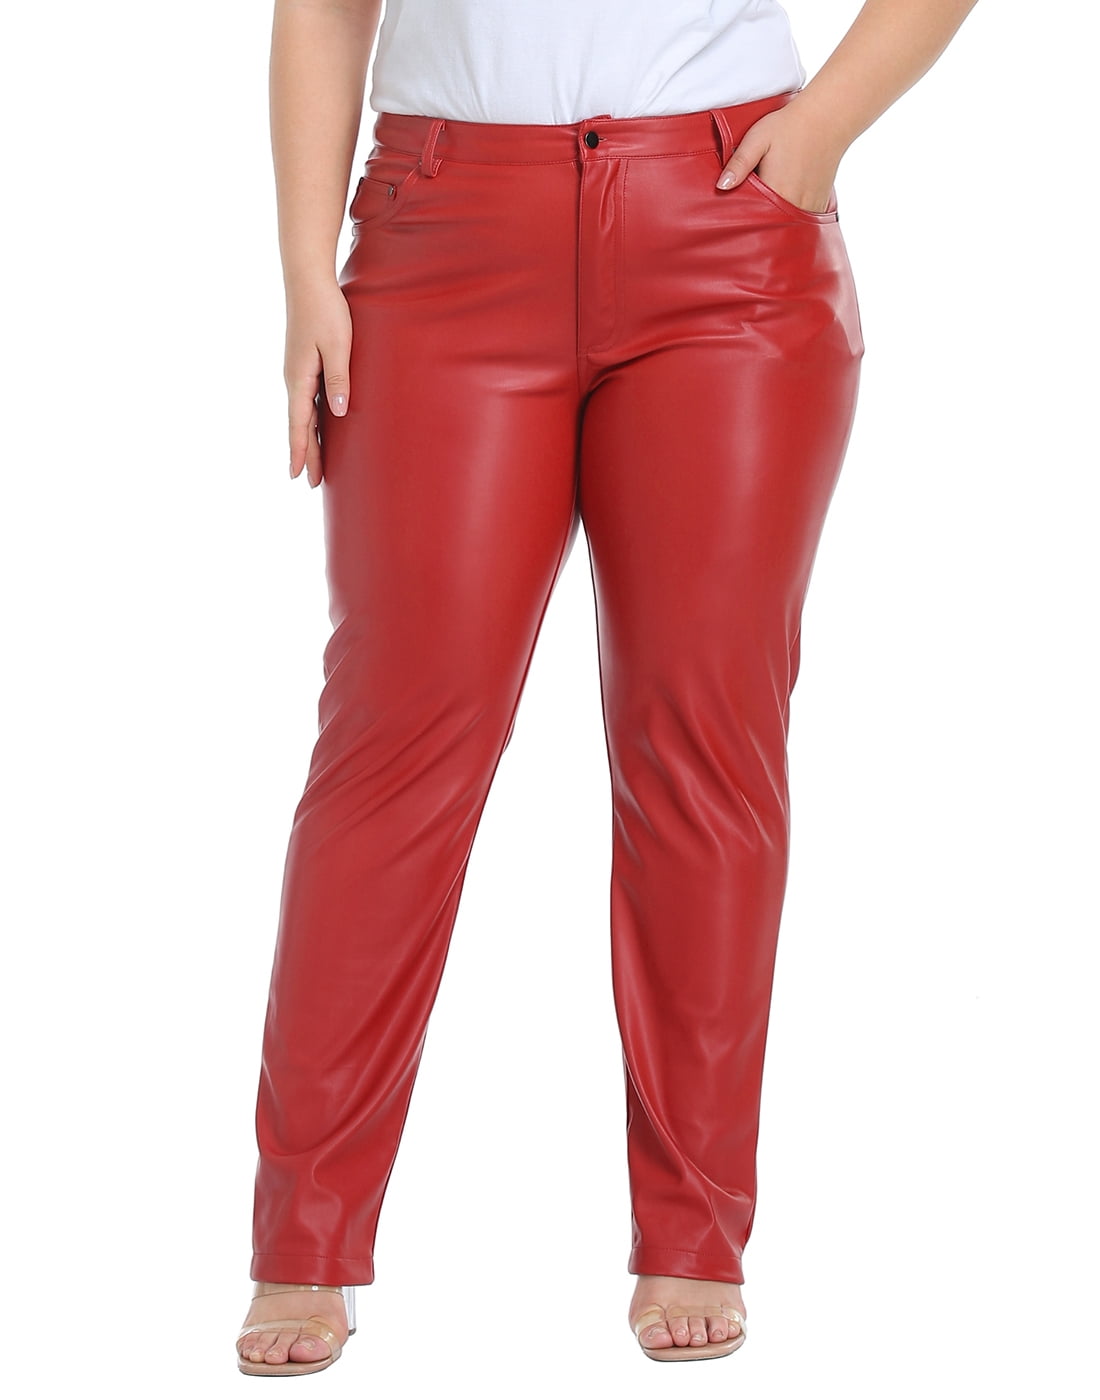 HDE Women's Plus Size High Waisted Faux Leather Pants with Pockets Brown 4X  